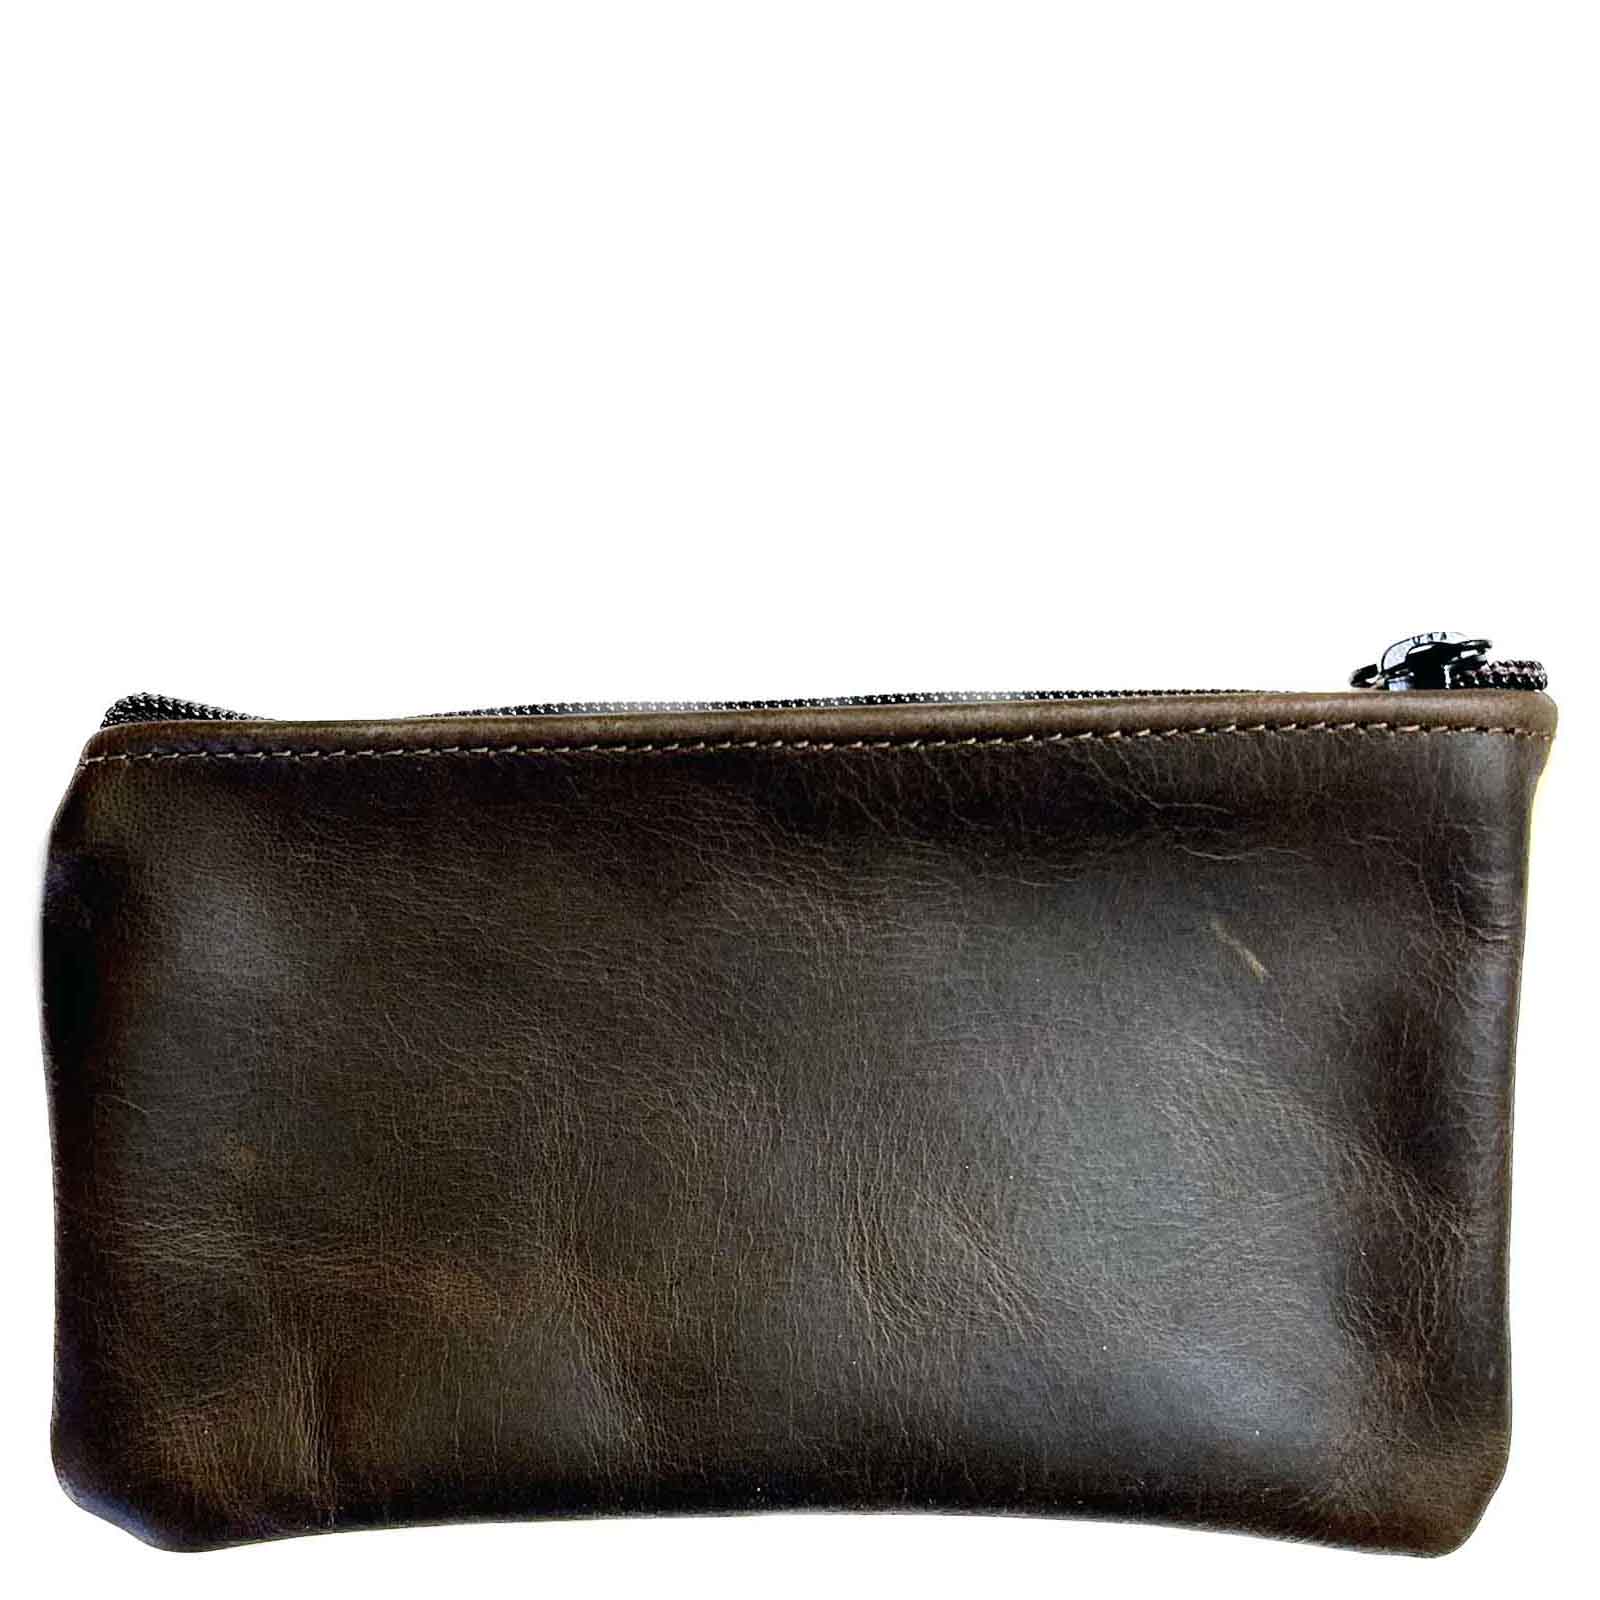 Rockmount Bronc Leather Western Cosmetic Purse